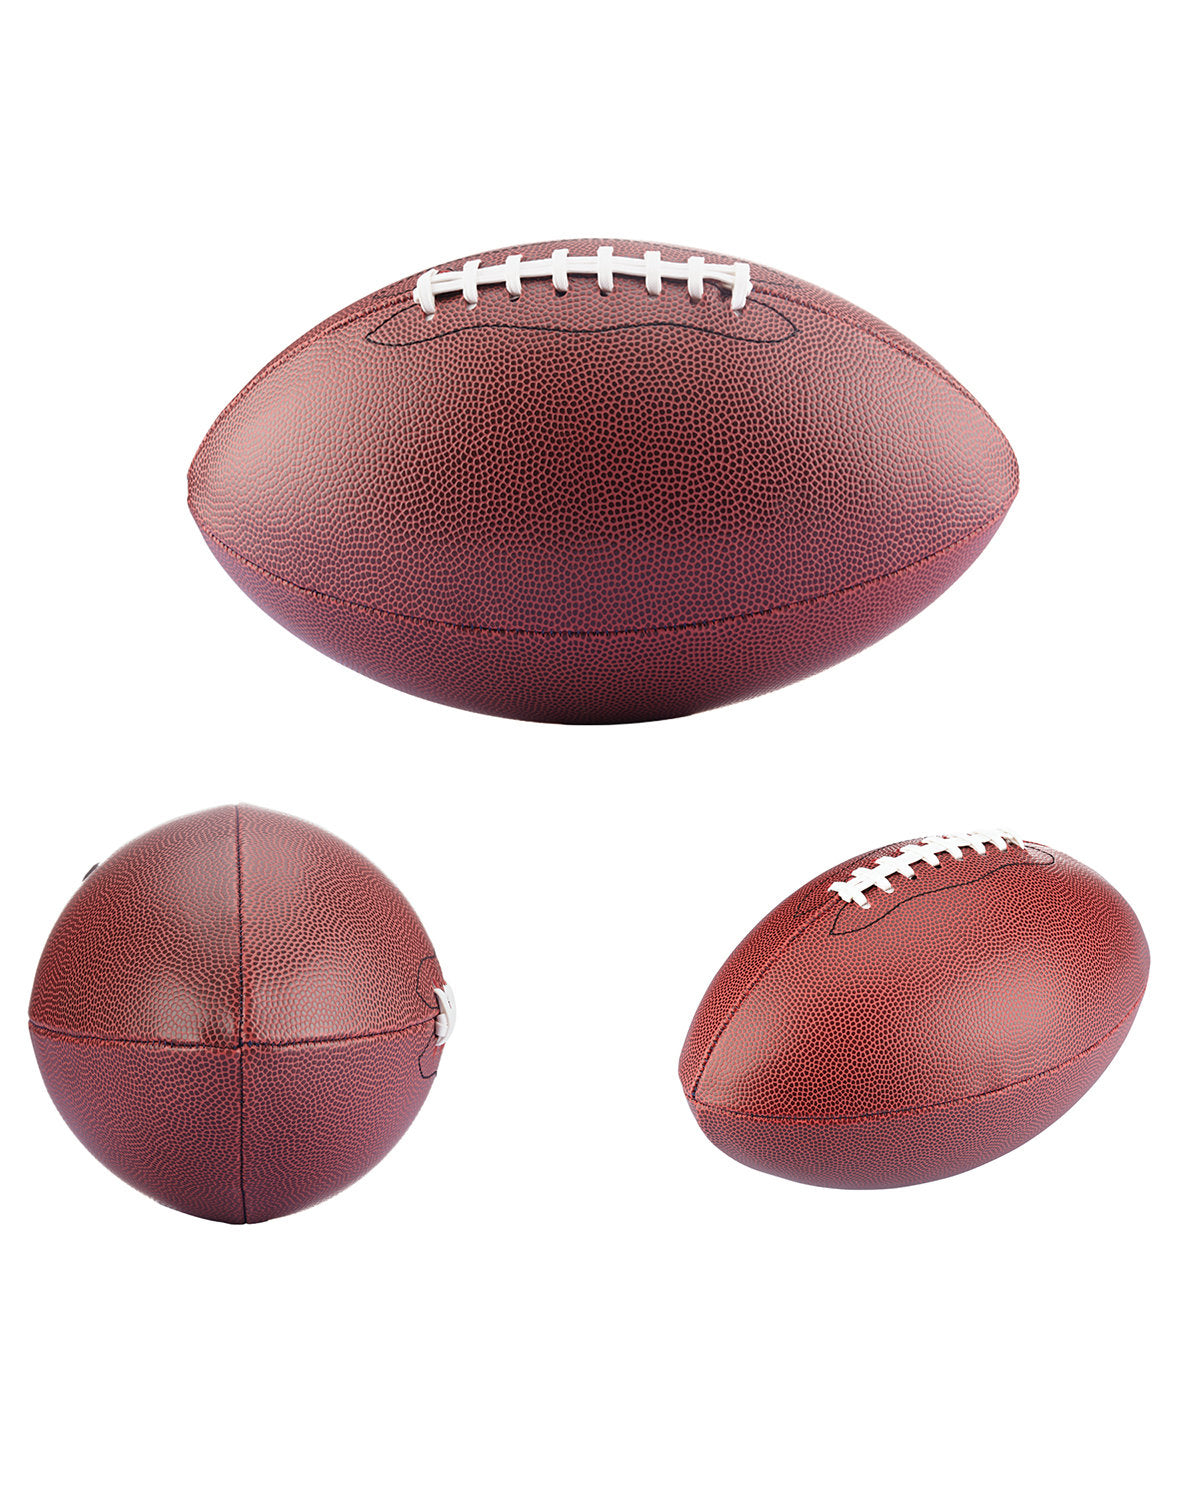 # Full Size Synthetic Promotional Football